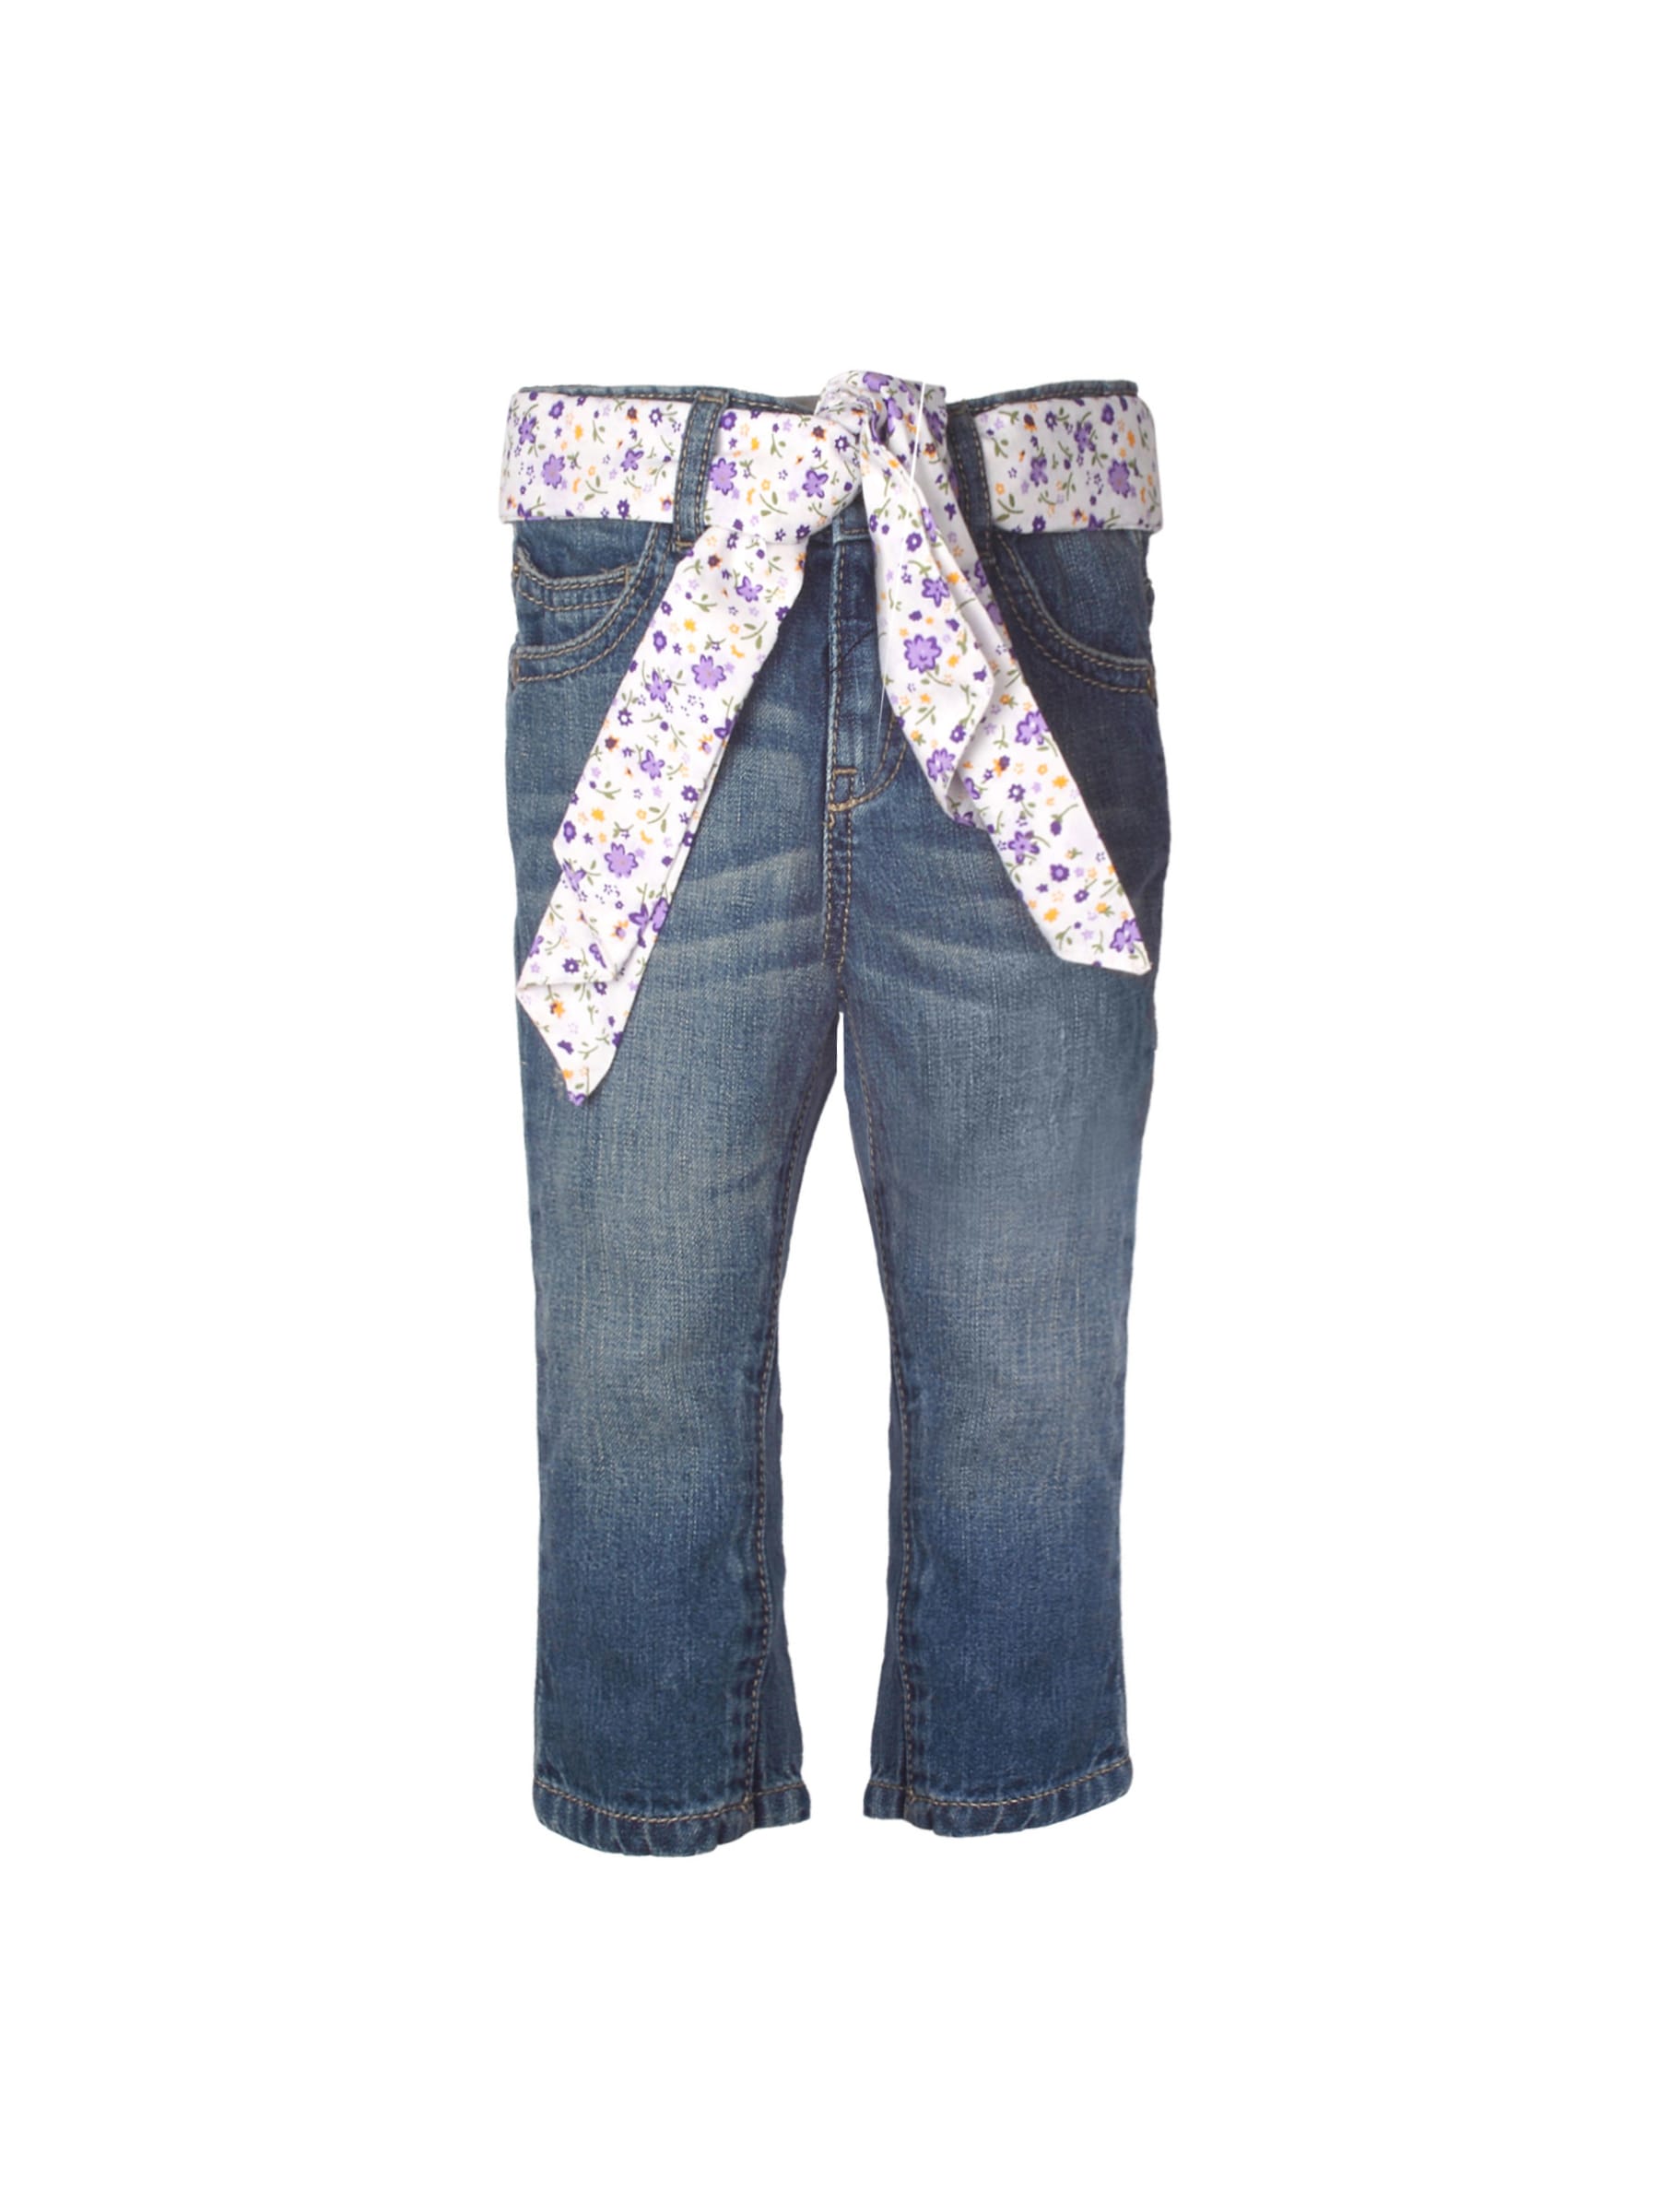 United Colors of Benetton Girls Washed Blue Jeans